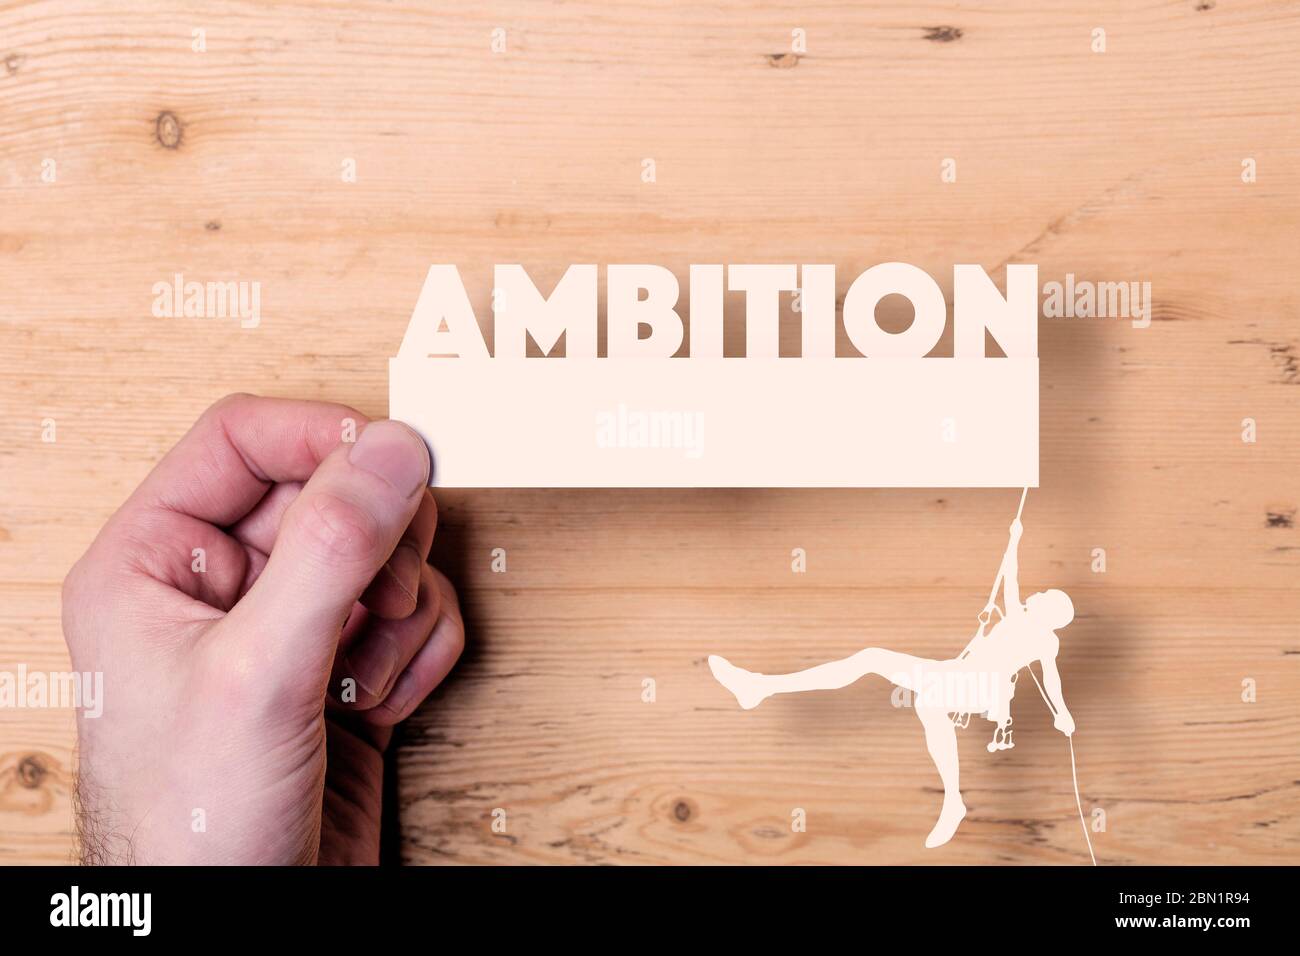 A paper cutout of a climber reaching the word Ambition. Business concept Stock Photo